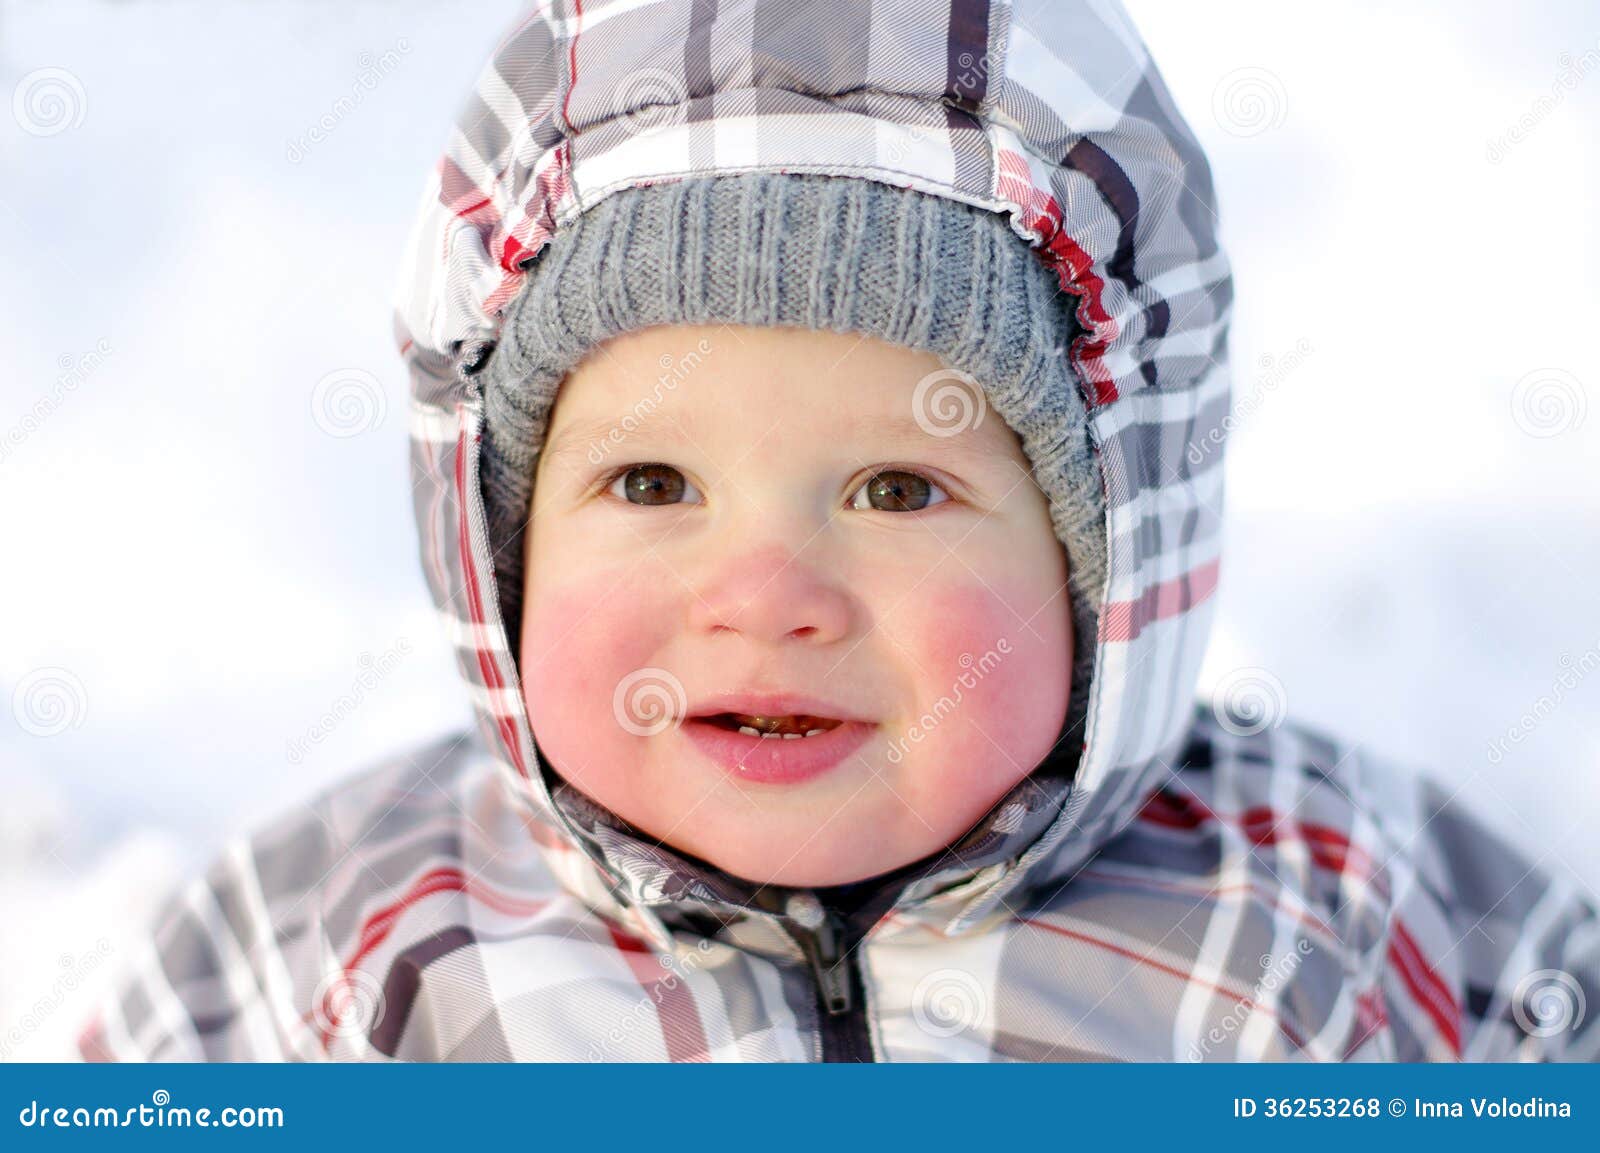 Happy Baby With Rosy Cheeks In Winter Royalty Free Stock ...